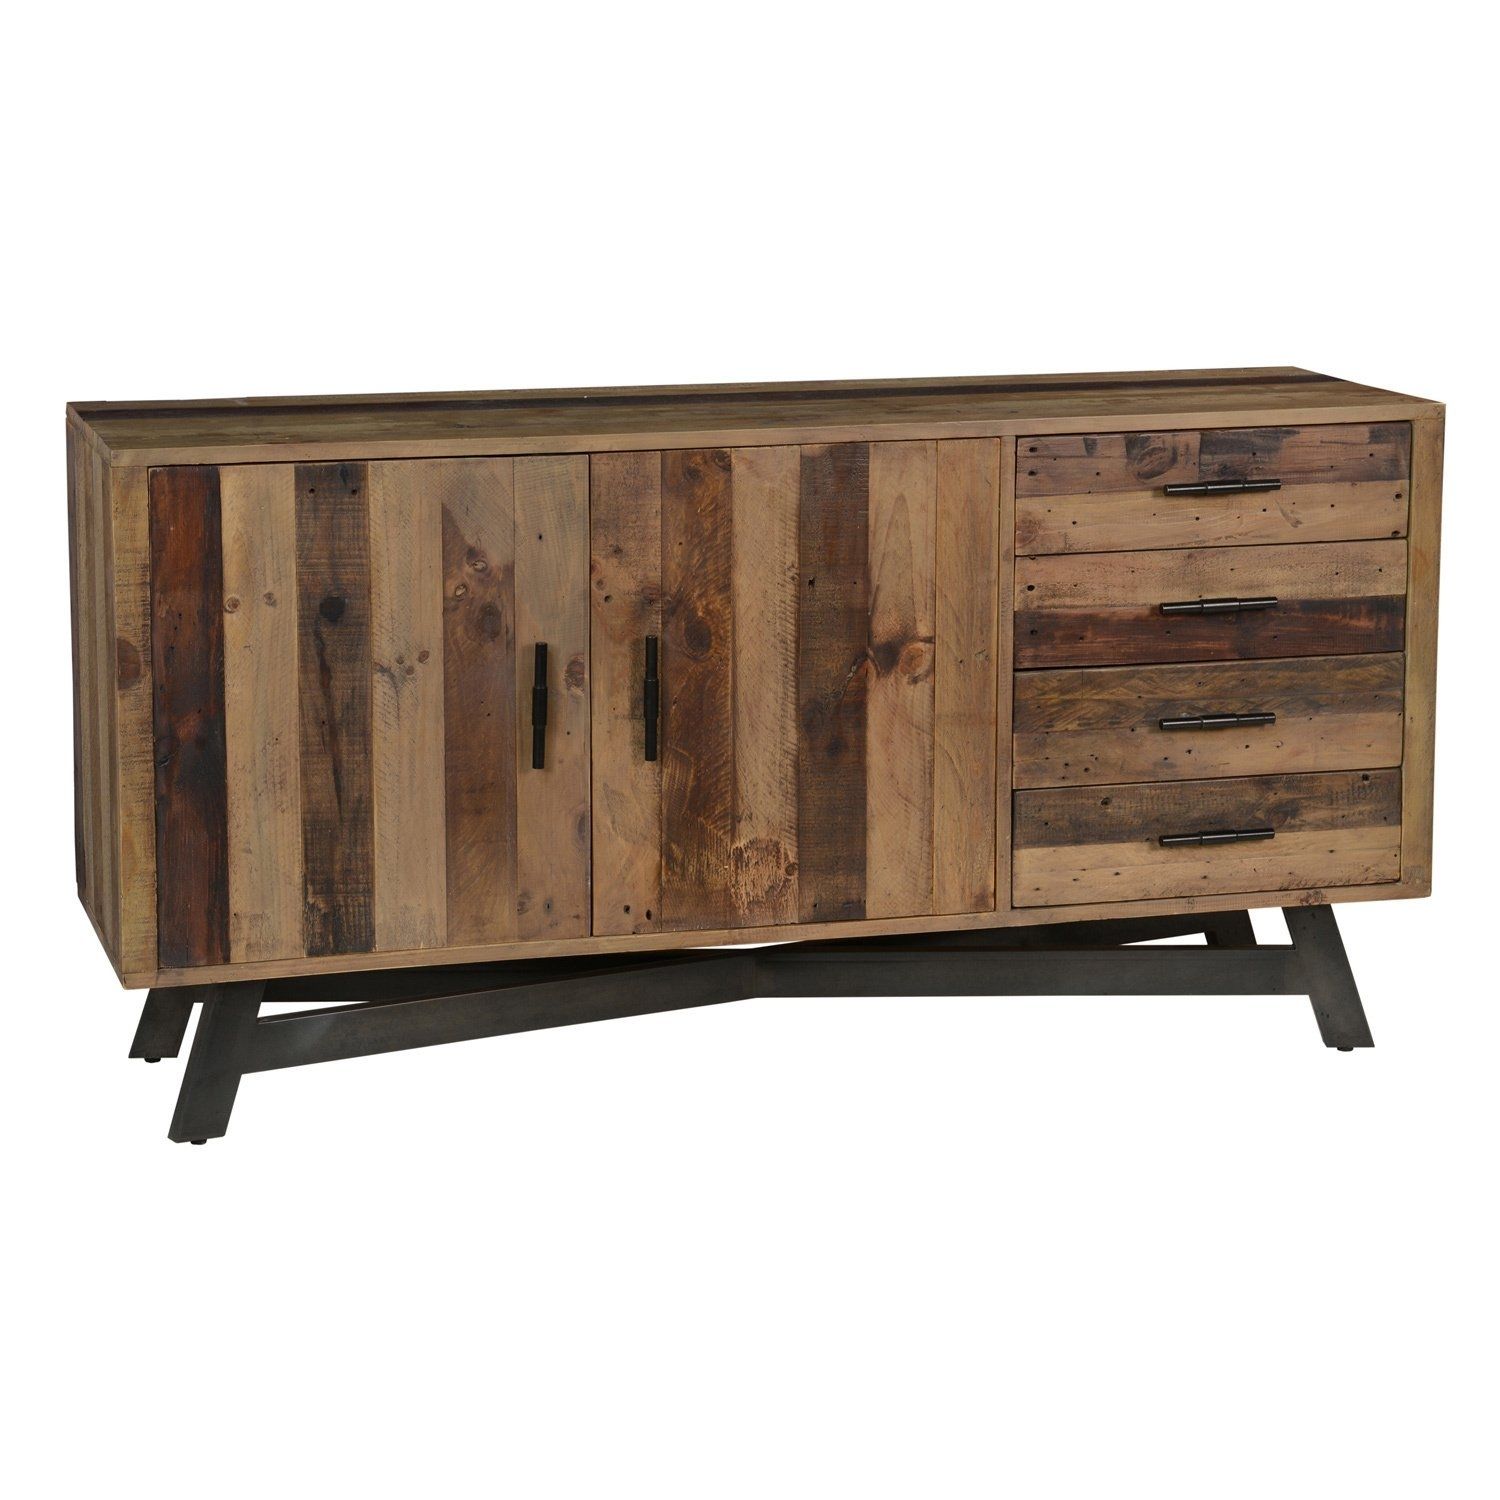 Shop Holden Reclaimed Wood 65 Inch Sideboardkosas Home – Free With Best And Newest Reclaimed Sideboards With Metal Panel (View 5 of 20)